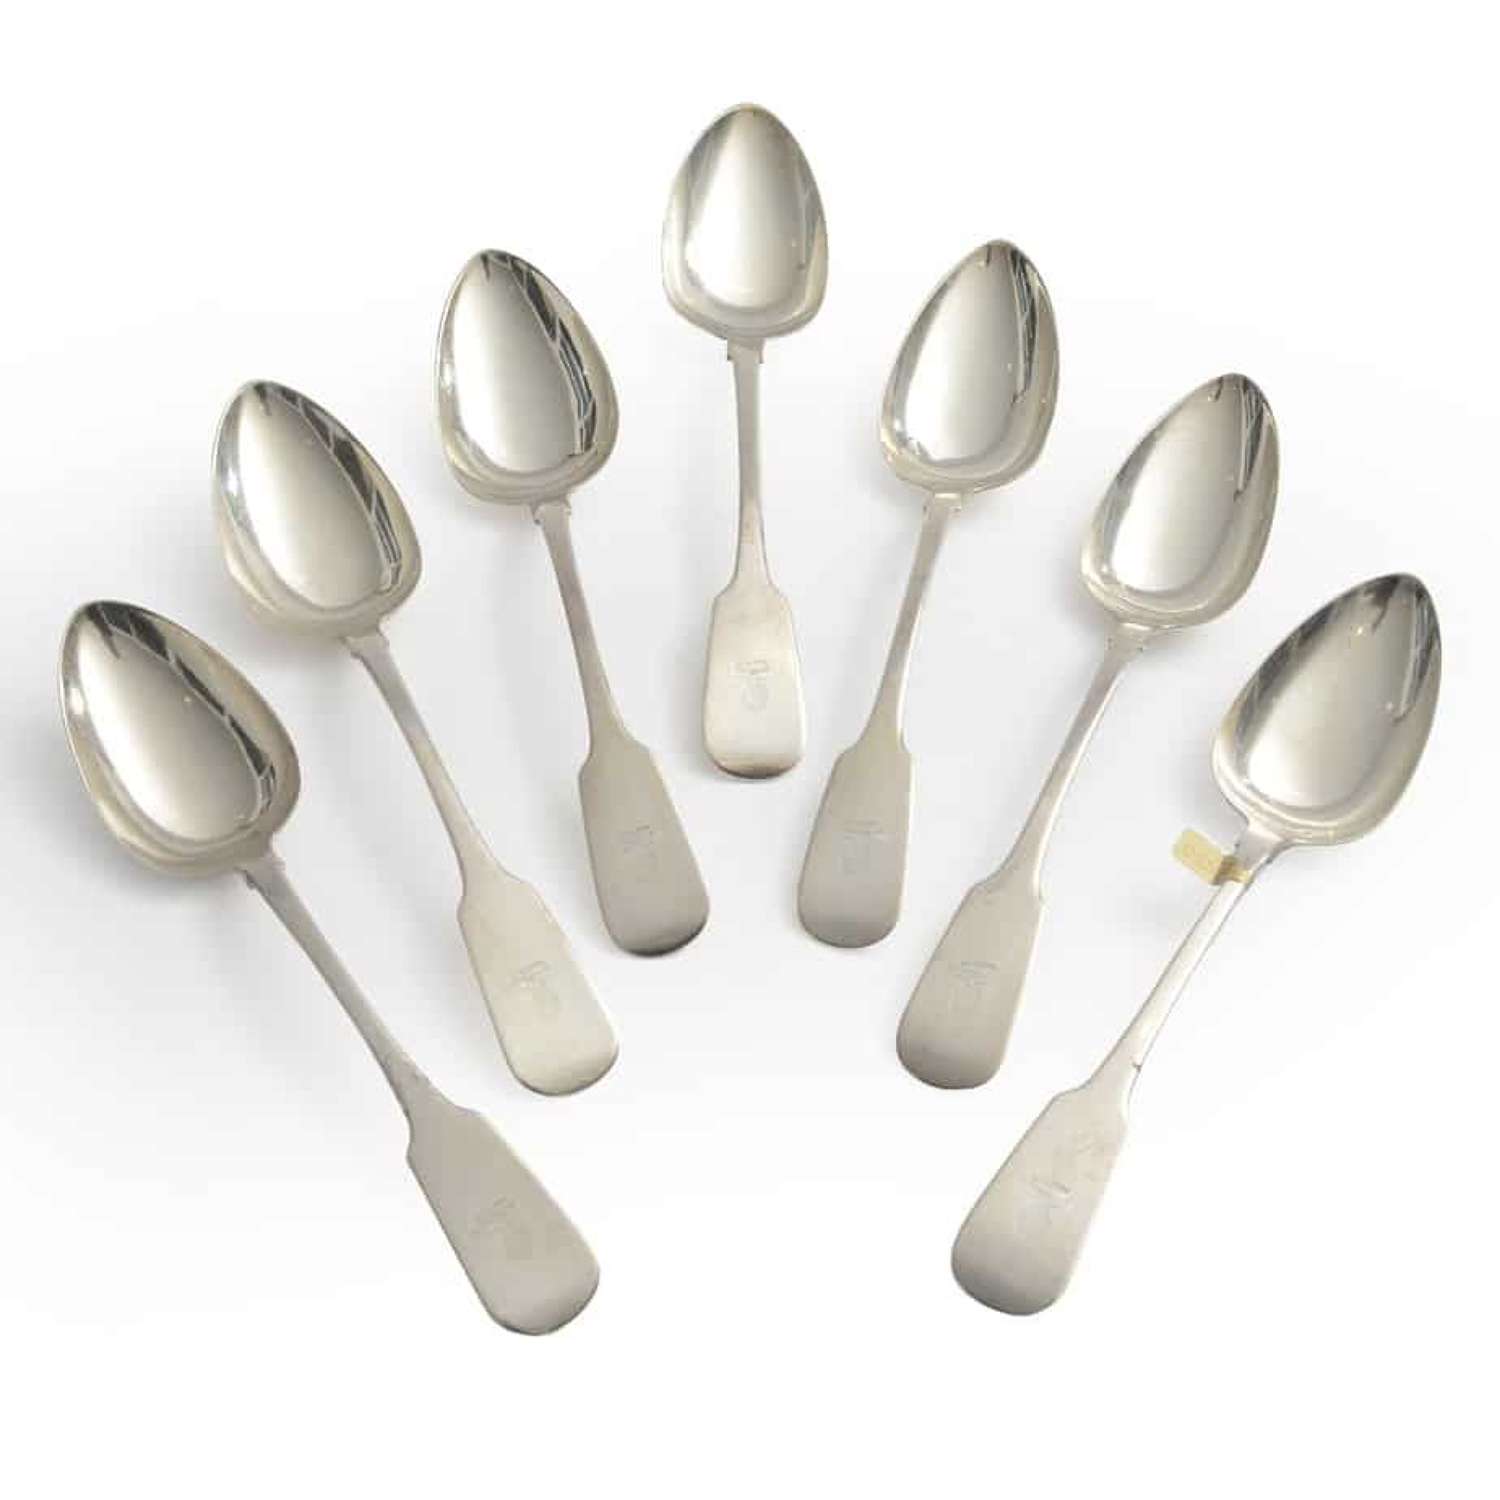 Set of 7 Irish silver Fiddle Pattern spoons - by Charles Marsh